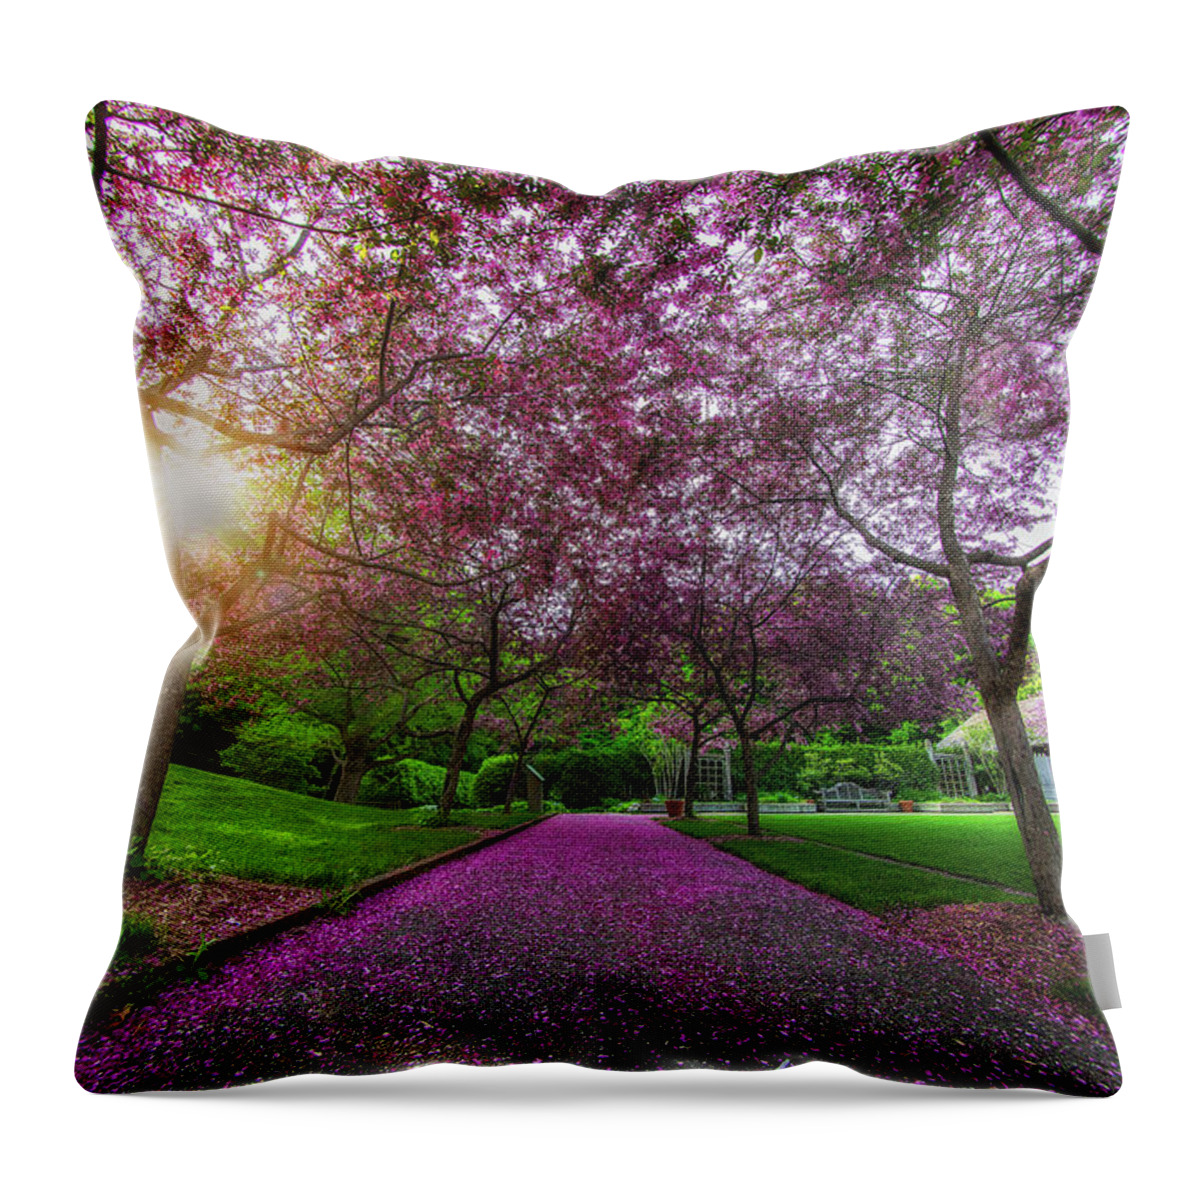  Throw Pillow featuring the photograph Pink Petal Trail by Nicole Engstrom